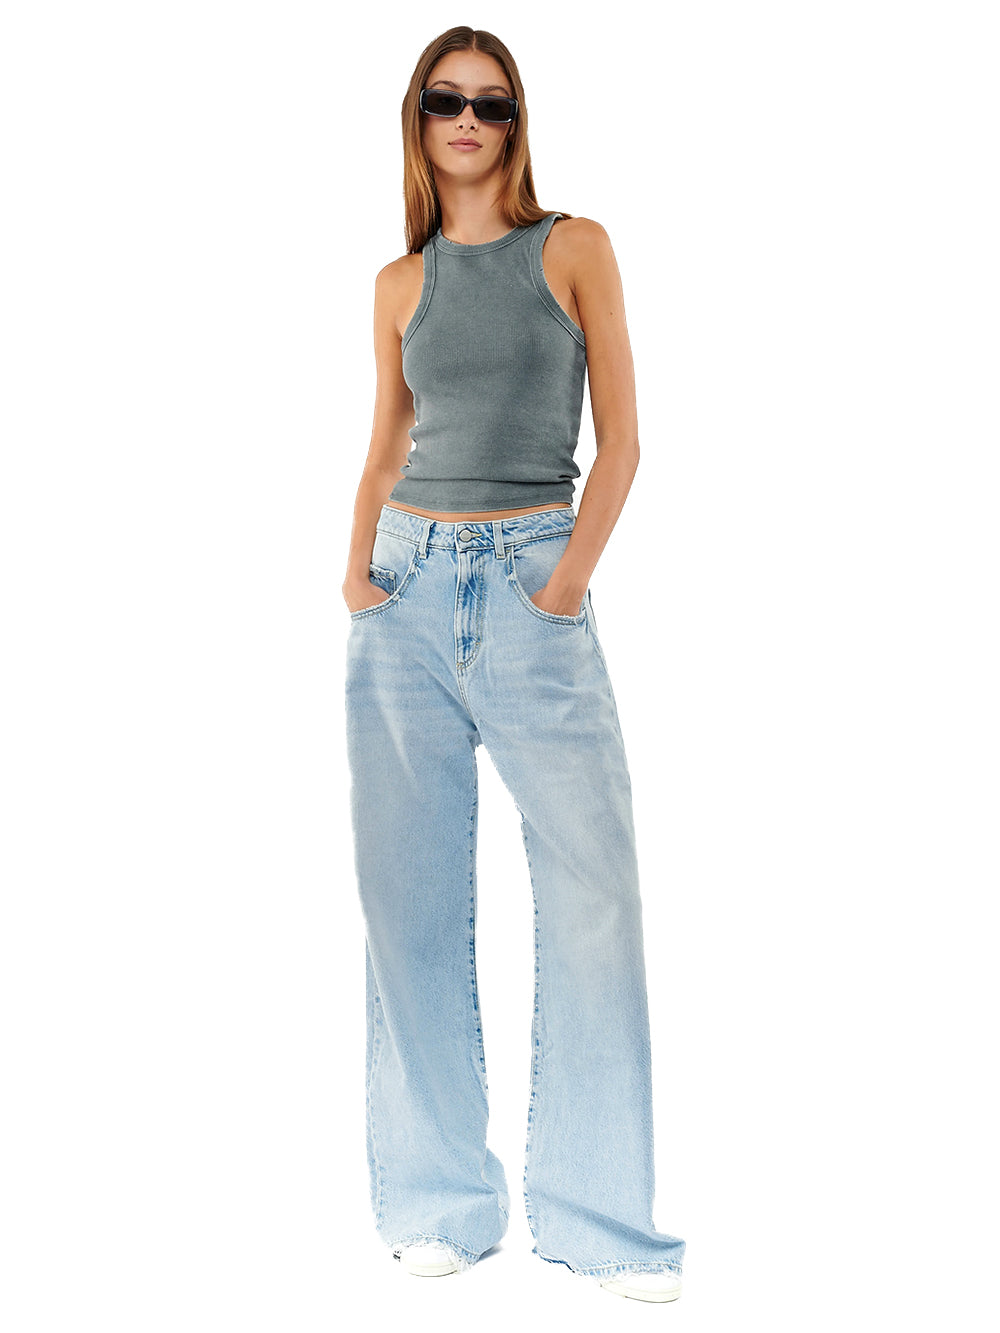 Debby women's jeans with light wash